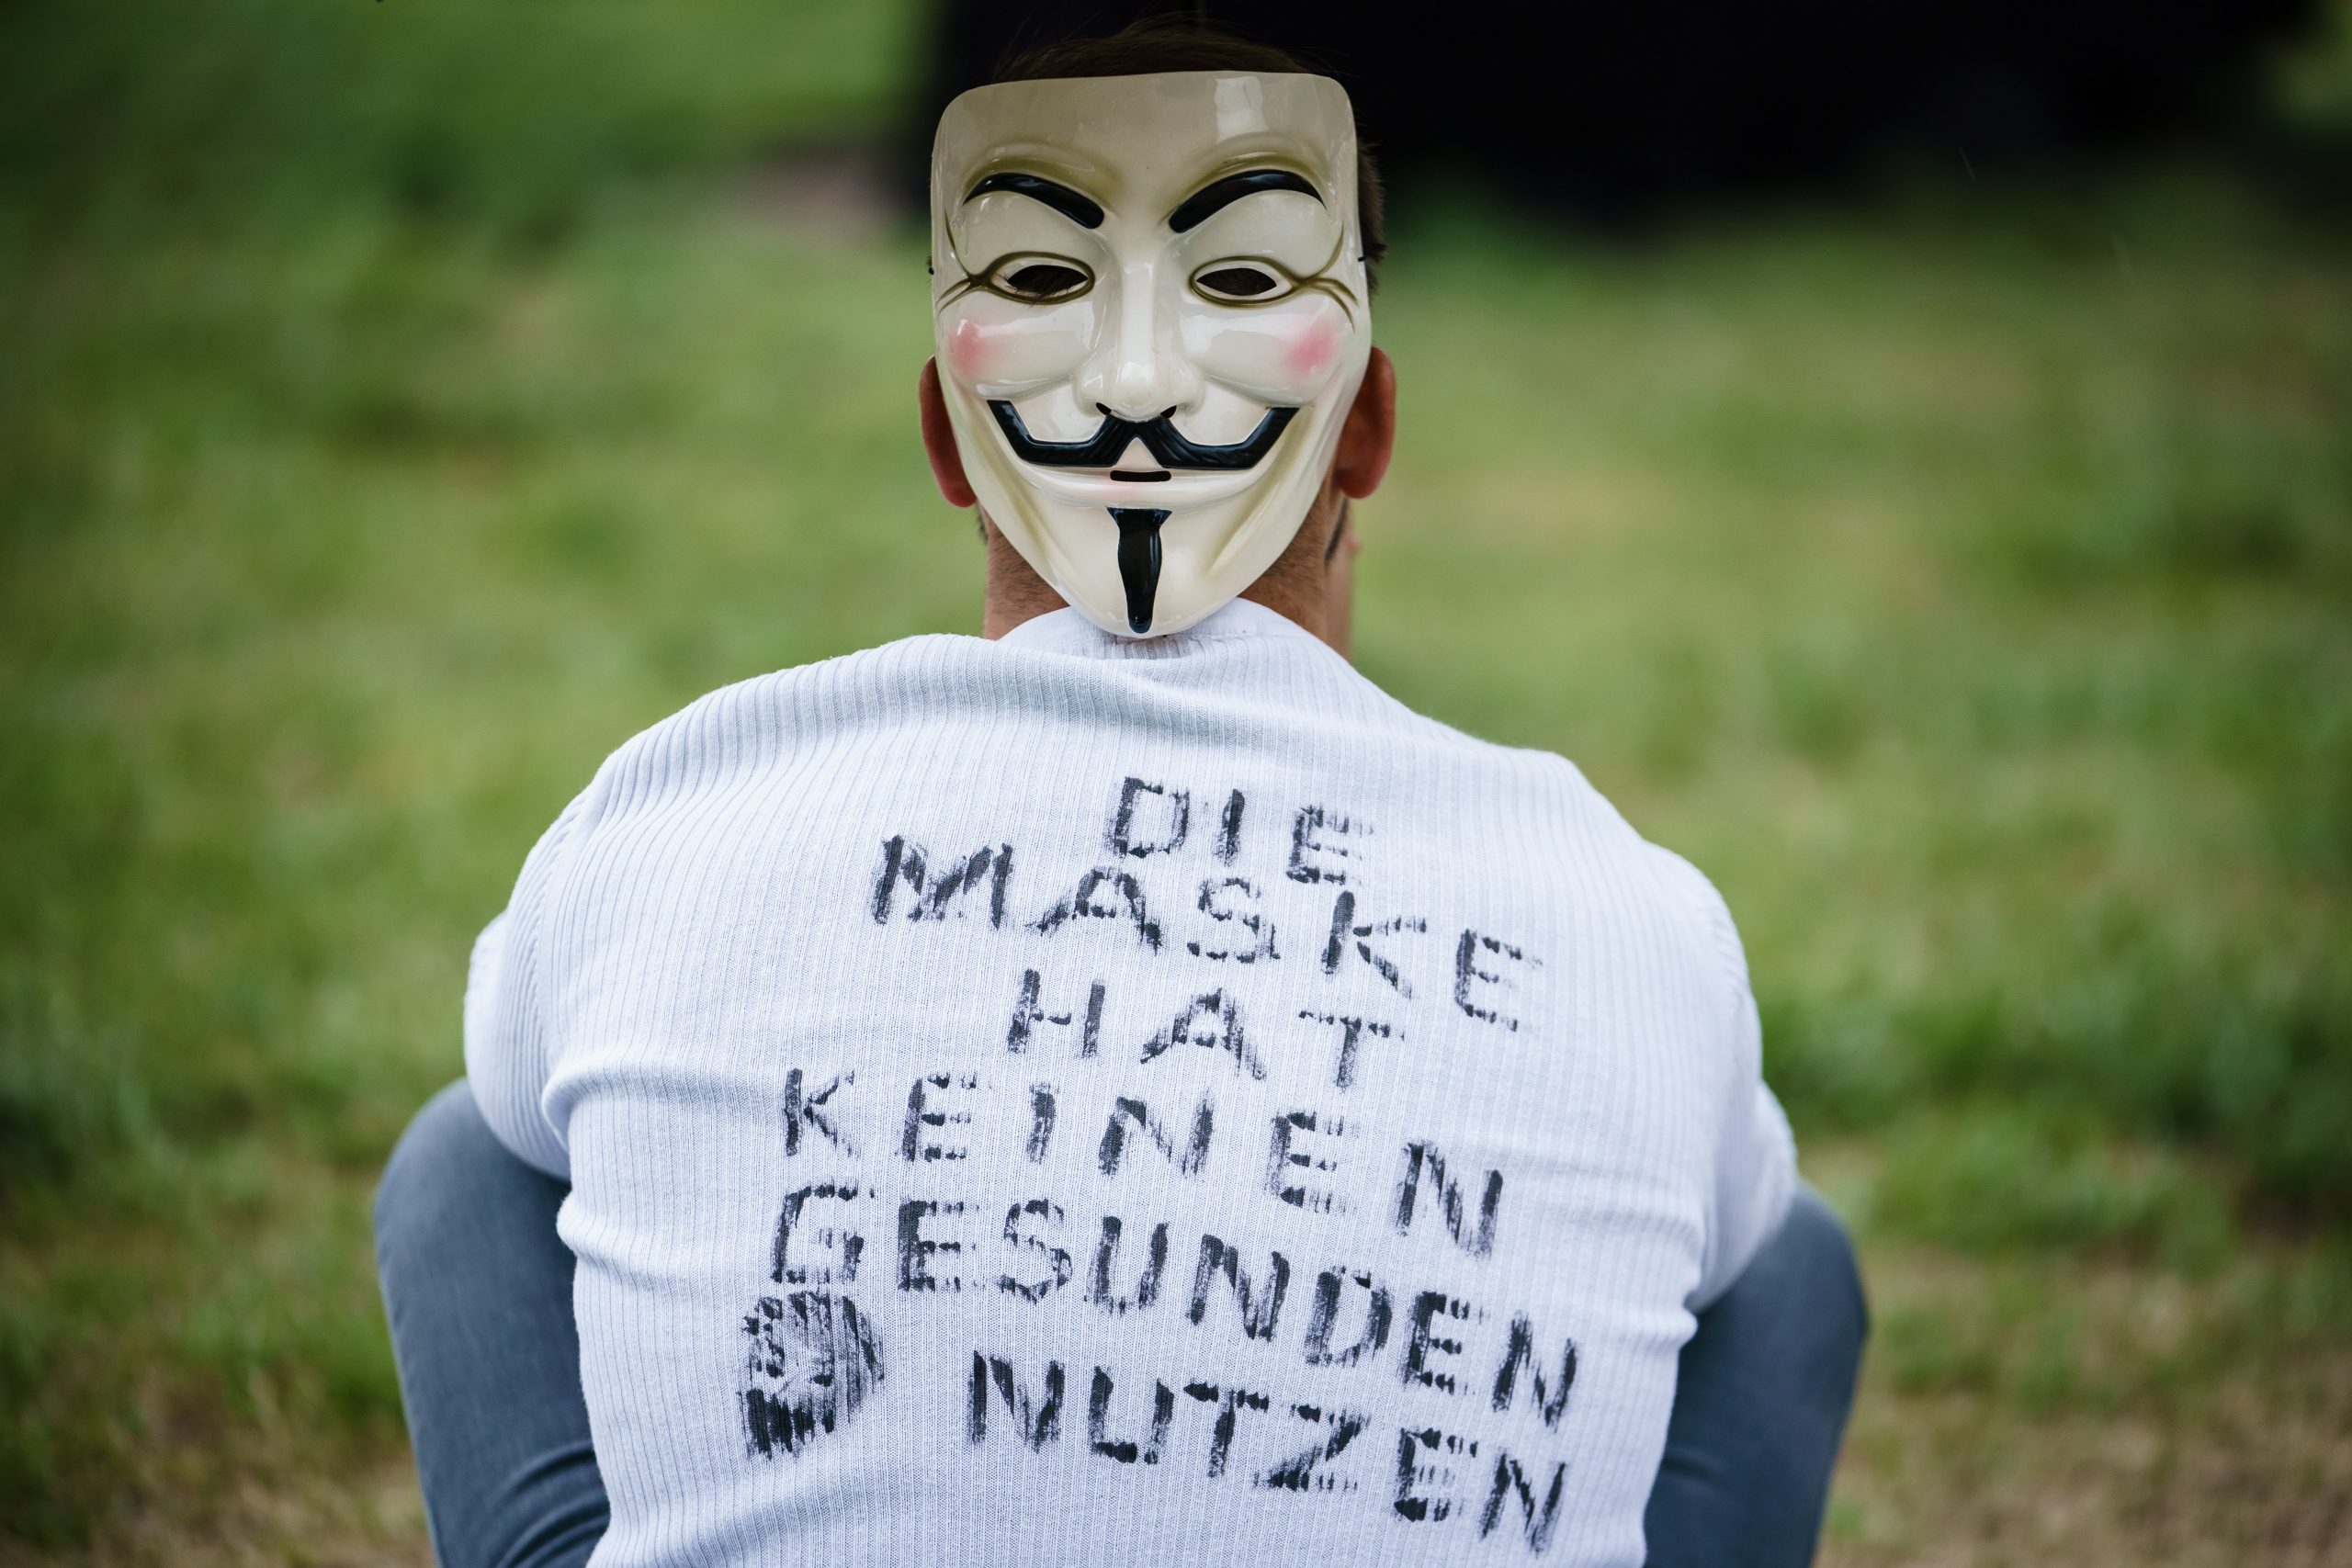 epa08397765 A protester wearing a Guy Fawkes mask and a shirt reading 'The mask has no healthy use' sits in front of the Volksbuehne theater under an umbrella during a protest in the district Mitte in Berlin, Germany, 02 May 2020. People from different political directions, like those representing the so-called 'Hygiene-Demo,' try to gather every Saturday at the Rosa-Luxemburg-Platz to protest against the restrictions and measures implemented to stem the widespread of the SARS-CoV-2 coronavirus that causes the COVID-19 disease. Counter protests take place as well, reports state. As right-wing and conspiracy theories are represented amongst some of the protesters, the Volksbuehne theater together with nearby residents express their displeasure with banners and slogans, not to be used as a scenery for right-wing protests.  EPA/CLEMENS BILAN